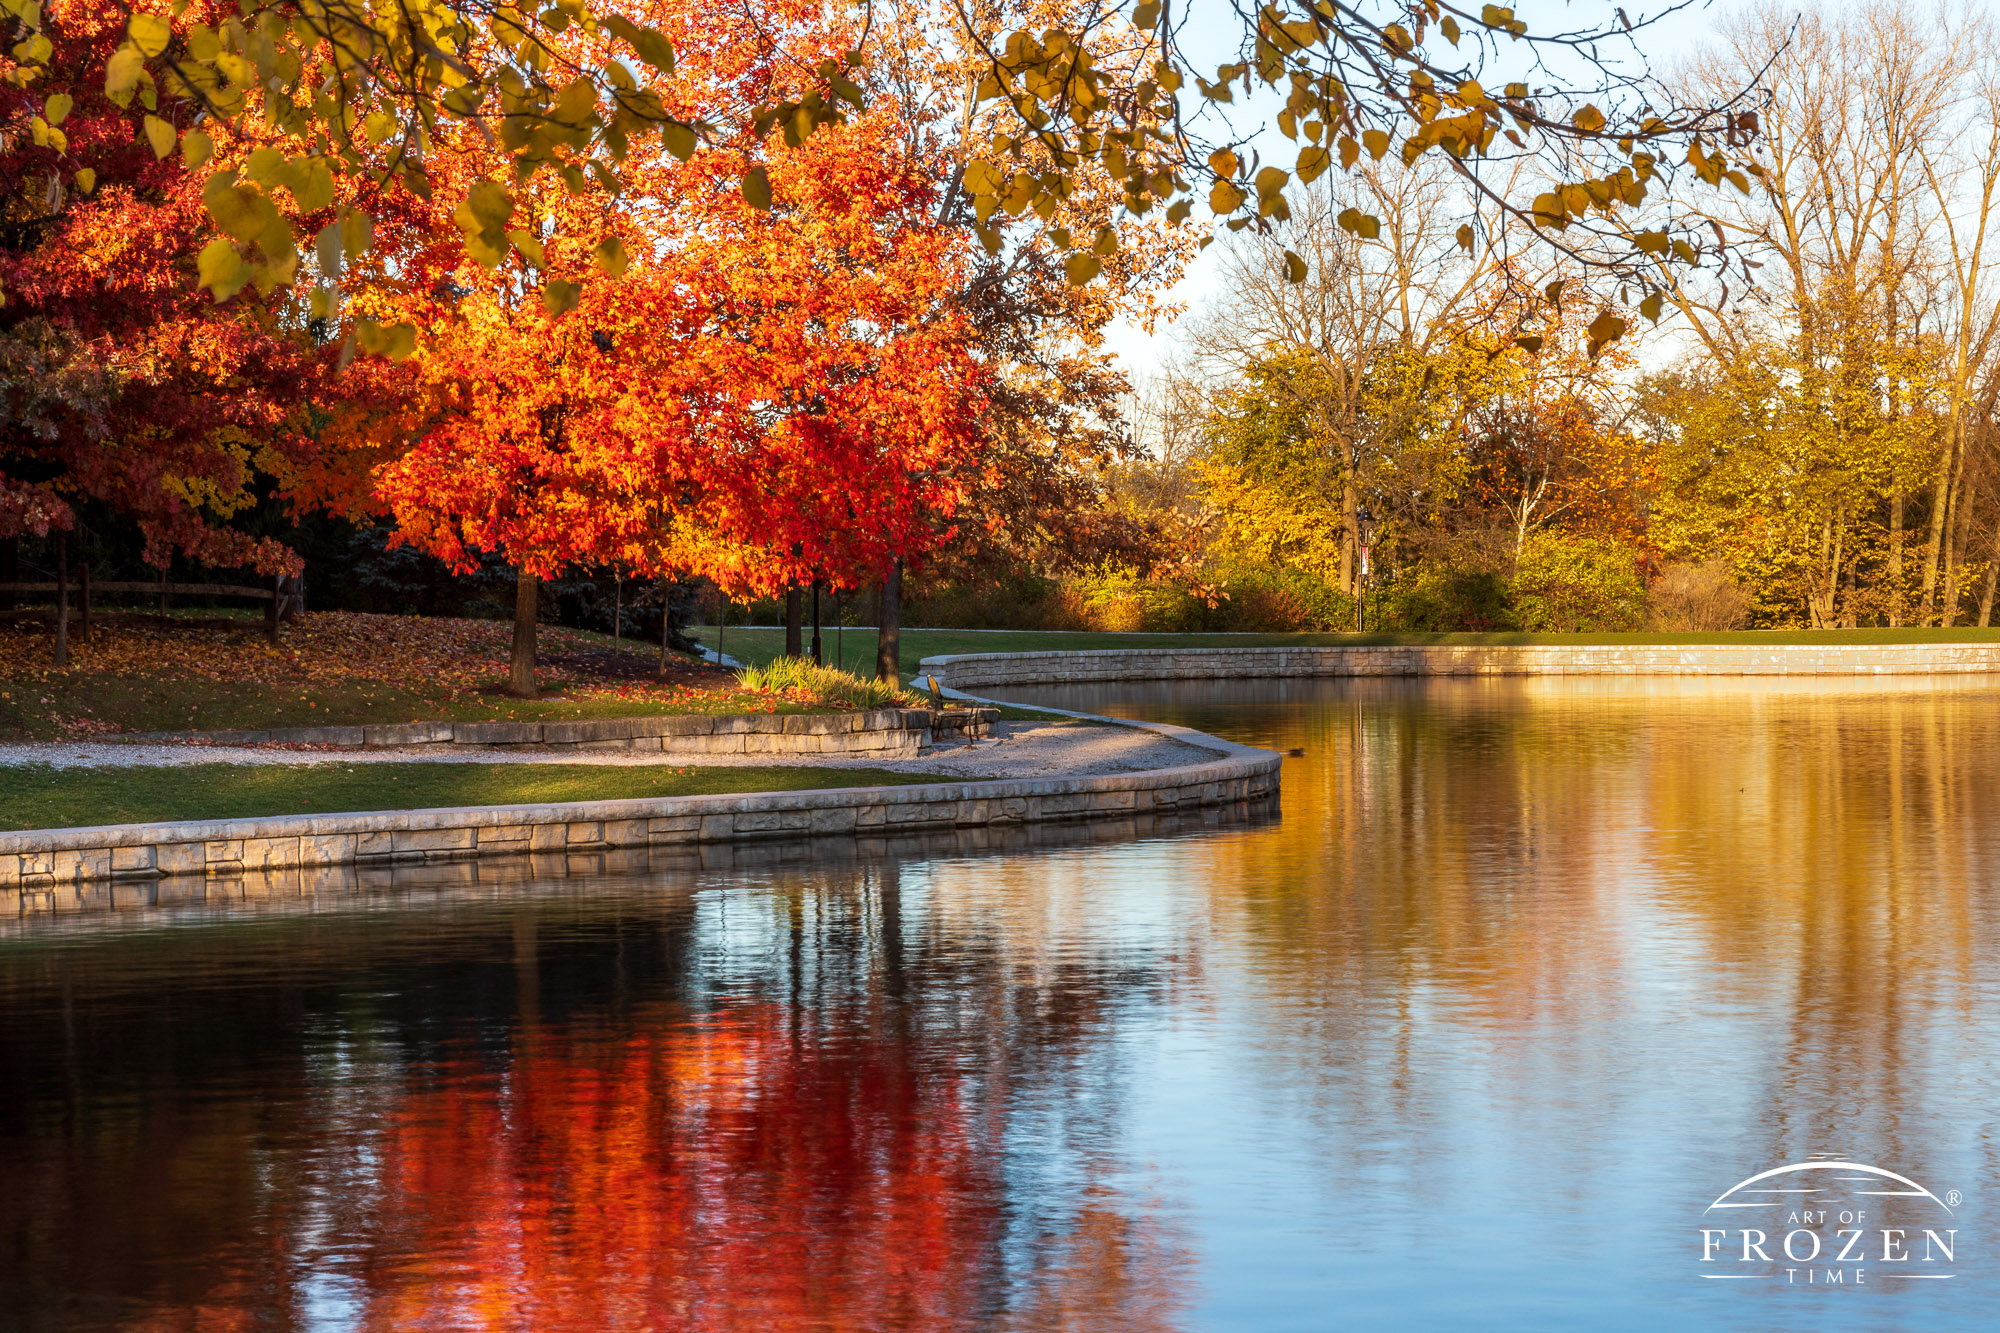 As autumn at peak color around Kettering’s Lincoln Park Pond, the setting sun painted the scene in golden light